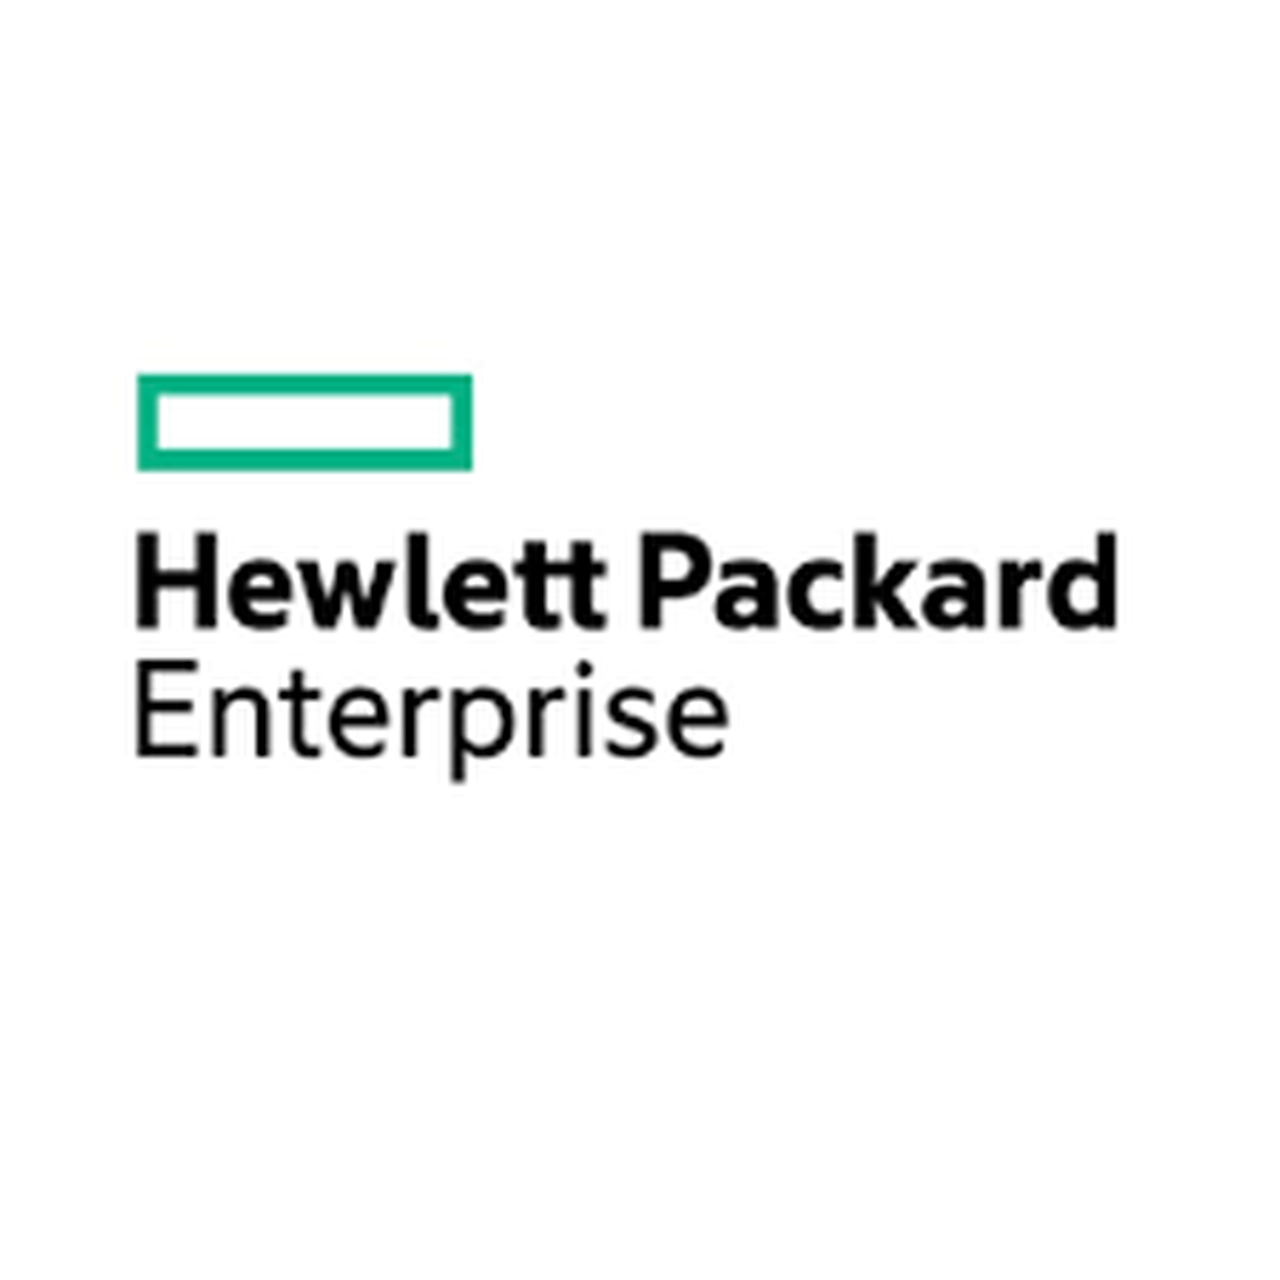 HPE 5940 48p 10GBT/6p 100G 2 F PS Japan - English localization